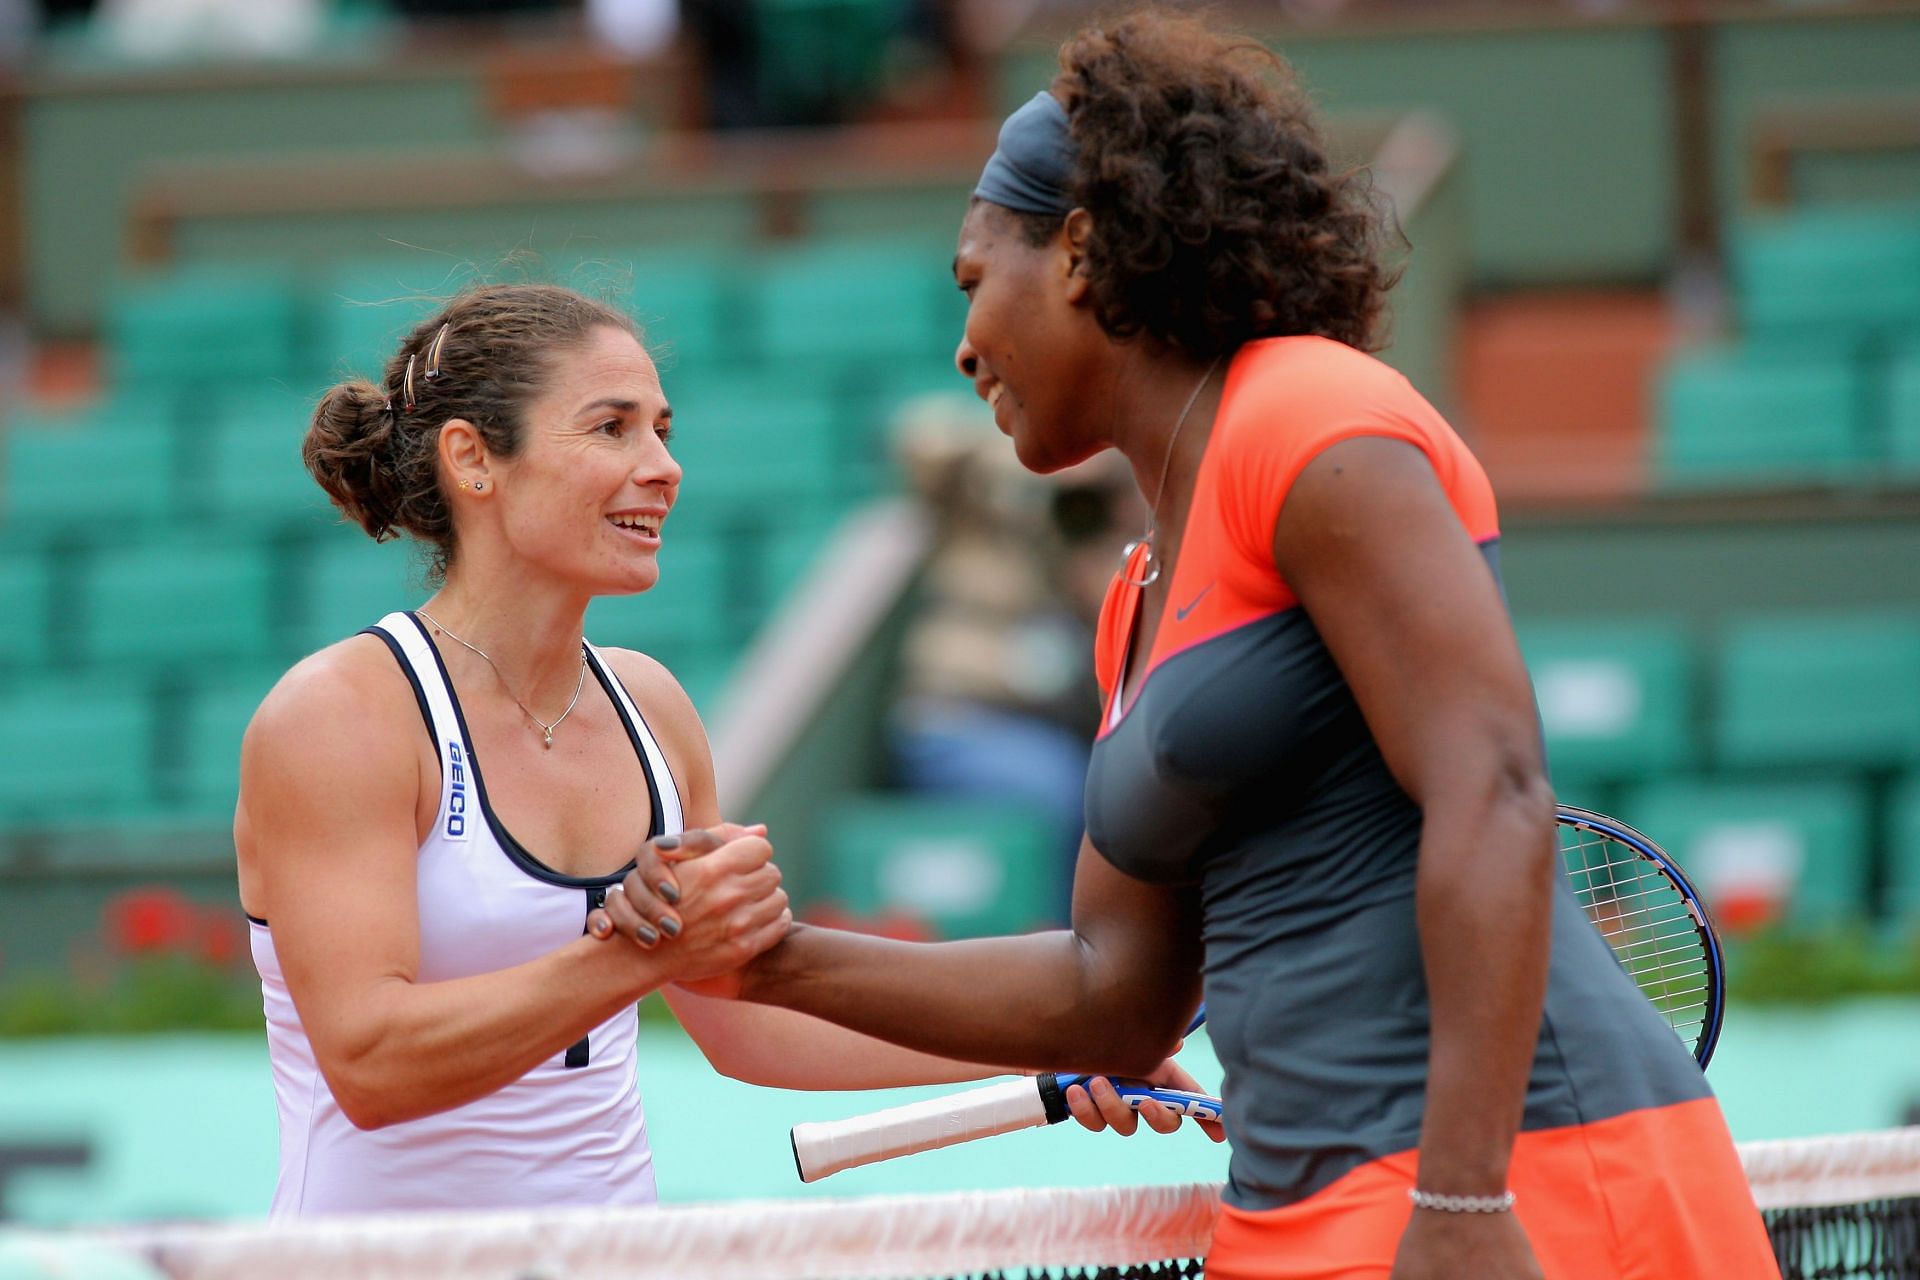 Serena Williams and Virginia Ruano Pascual after their match at the 2009 French Open